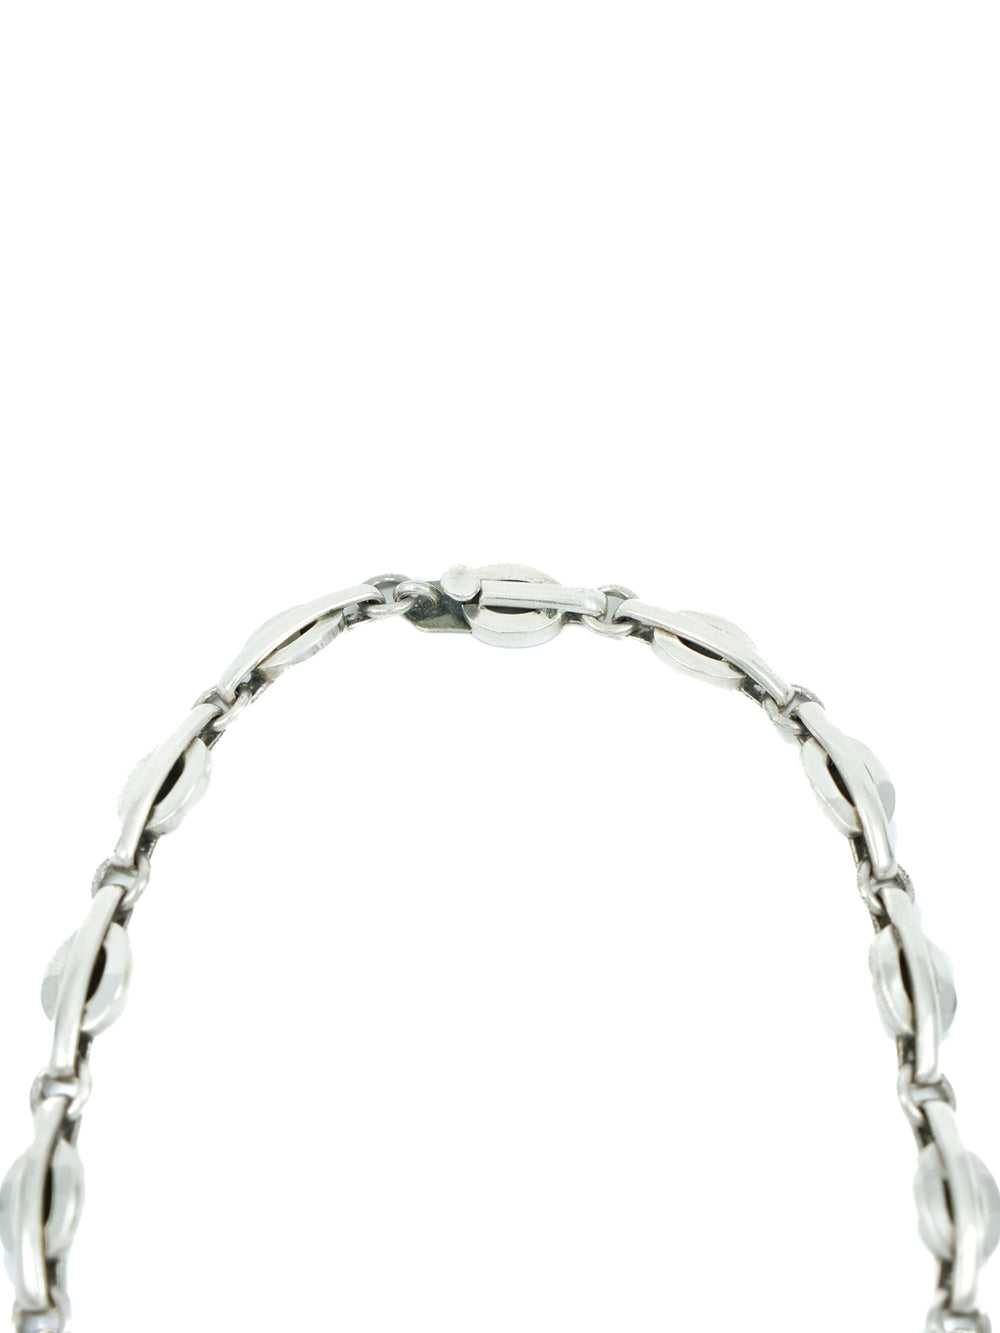 Mexican Sterling Oval and Bar Link Necklace - image 3